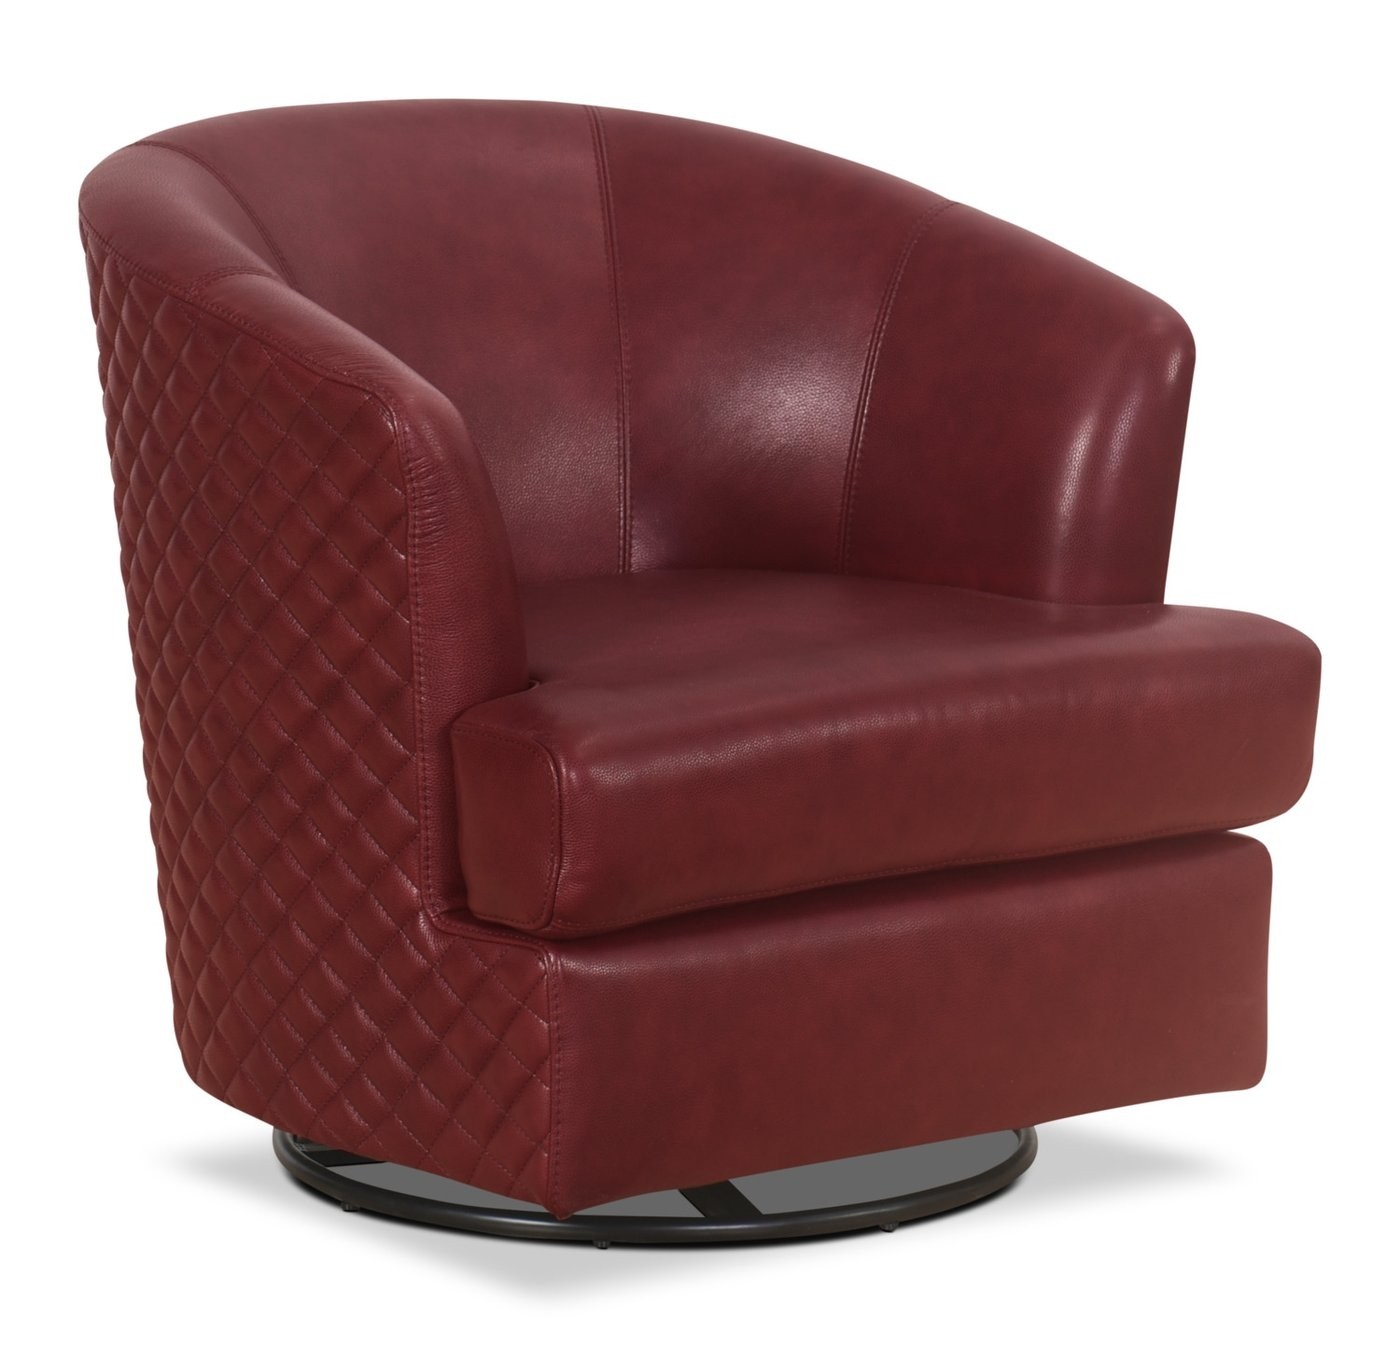 Leola genuine leather accent swivel chair red the brick